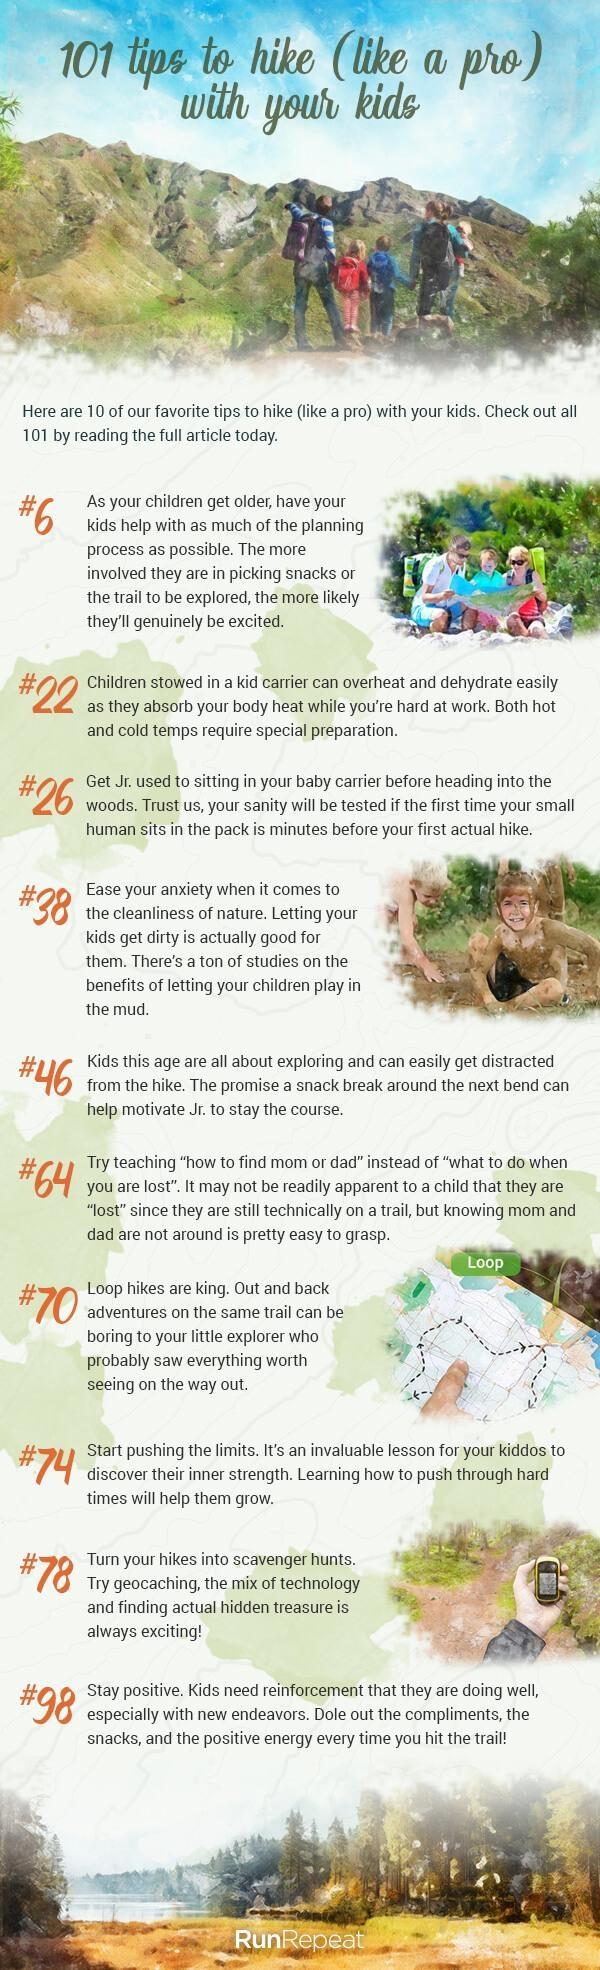 tips-for-hiking-with-your-kids-infographic